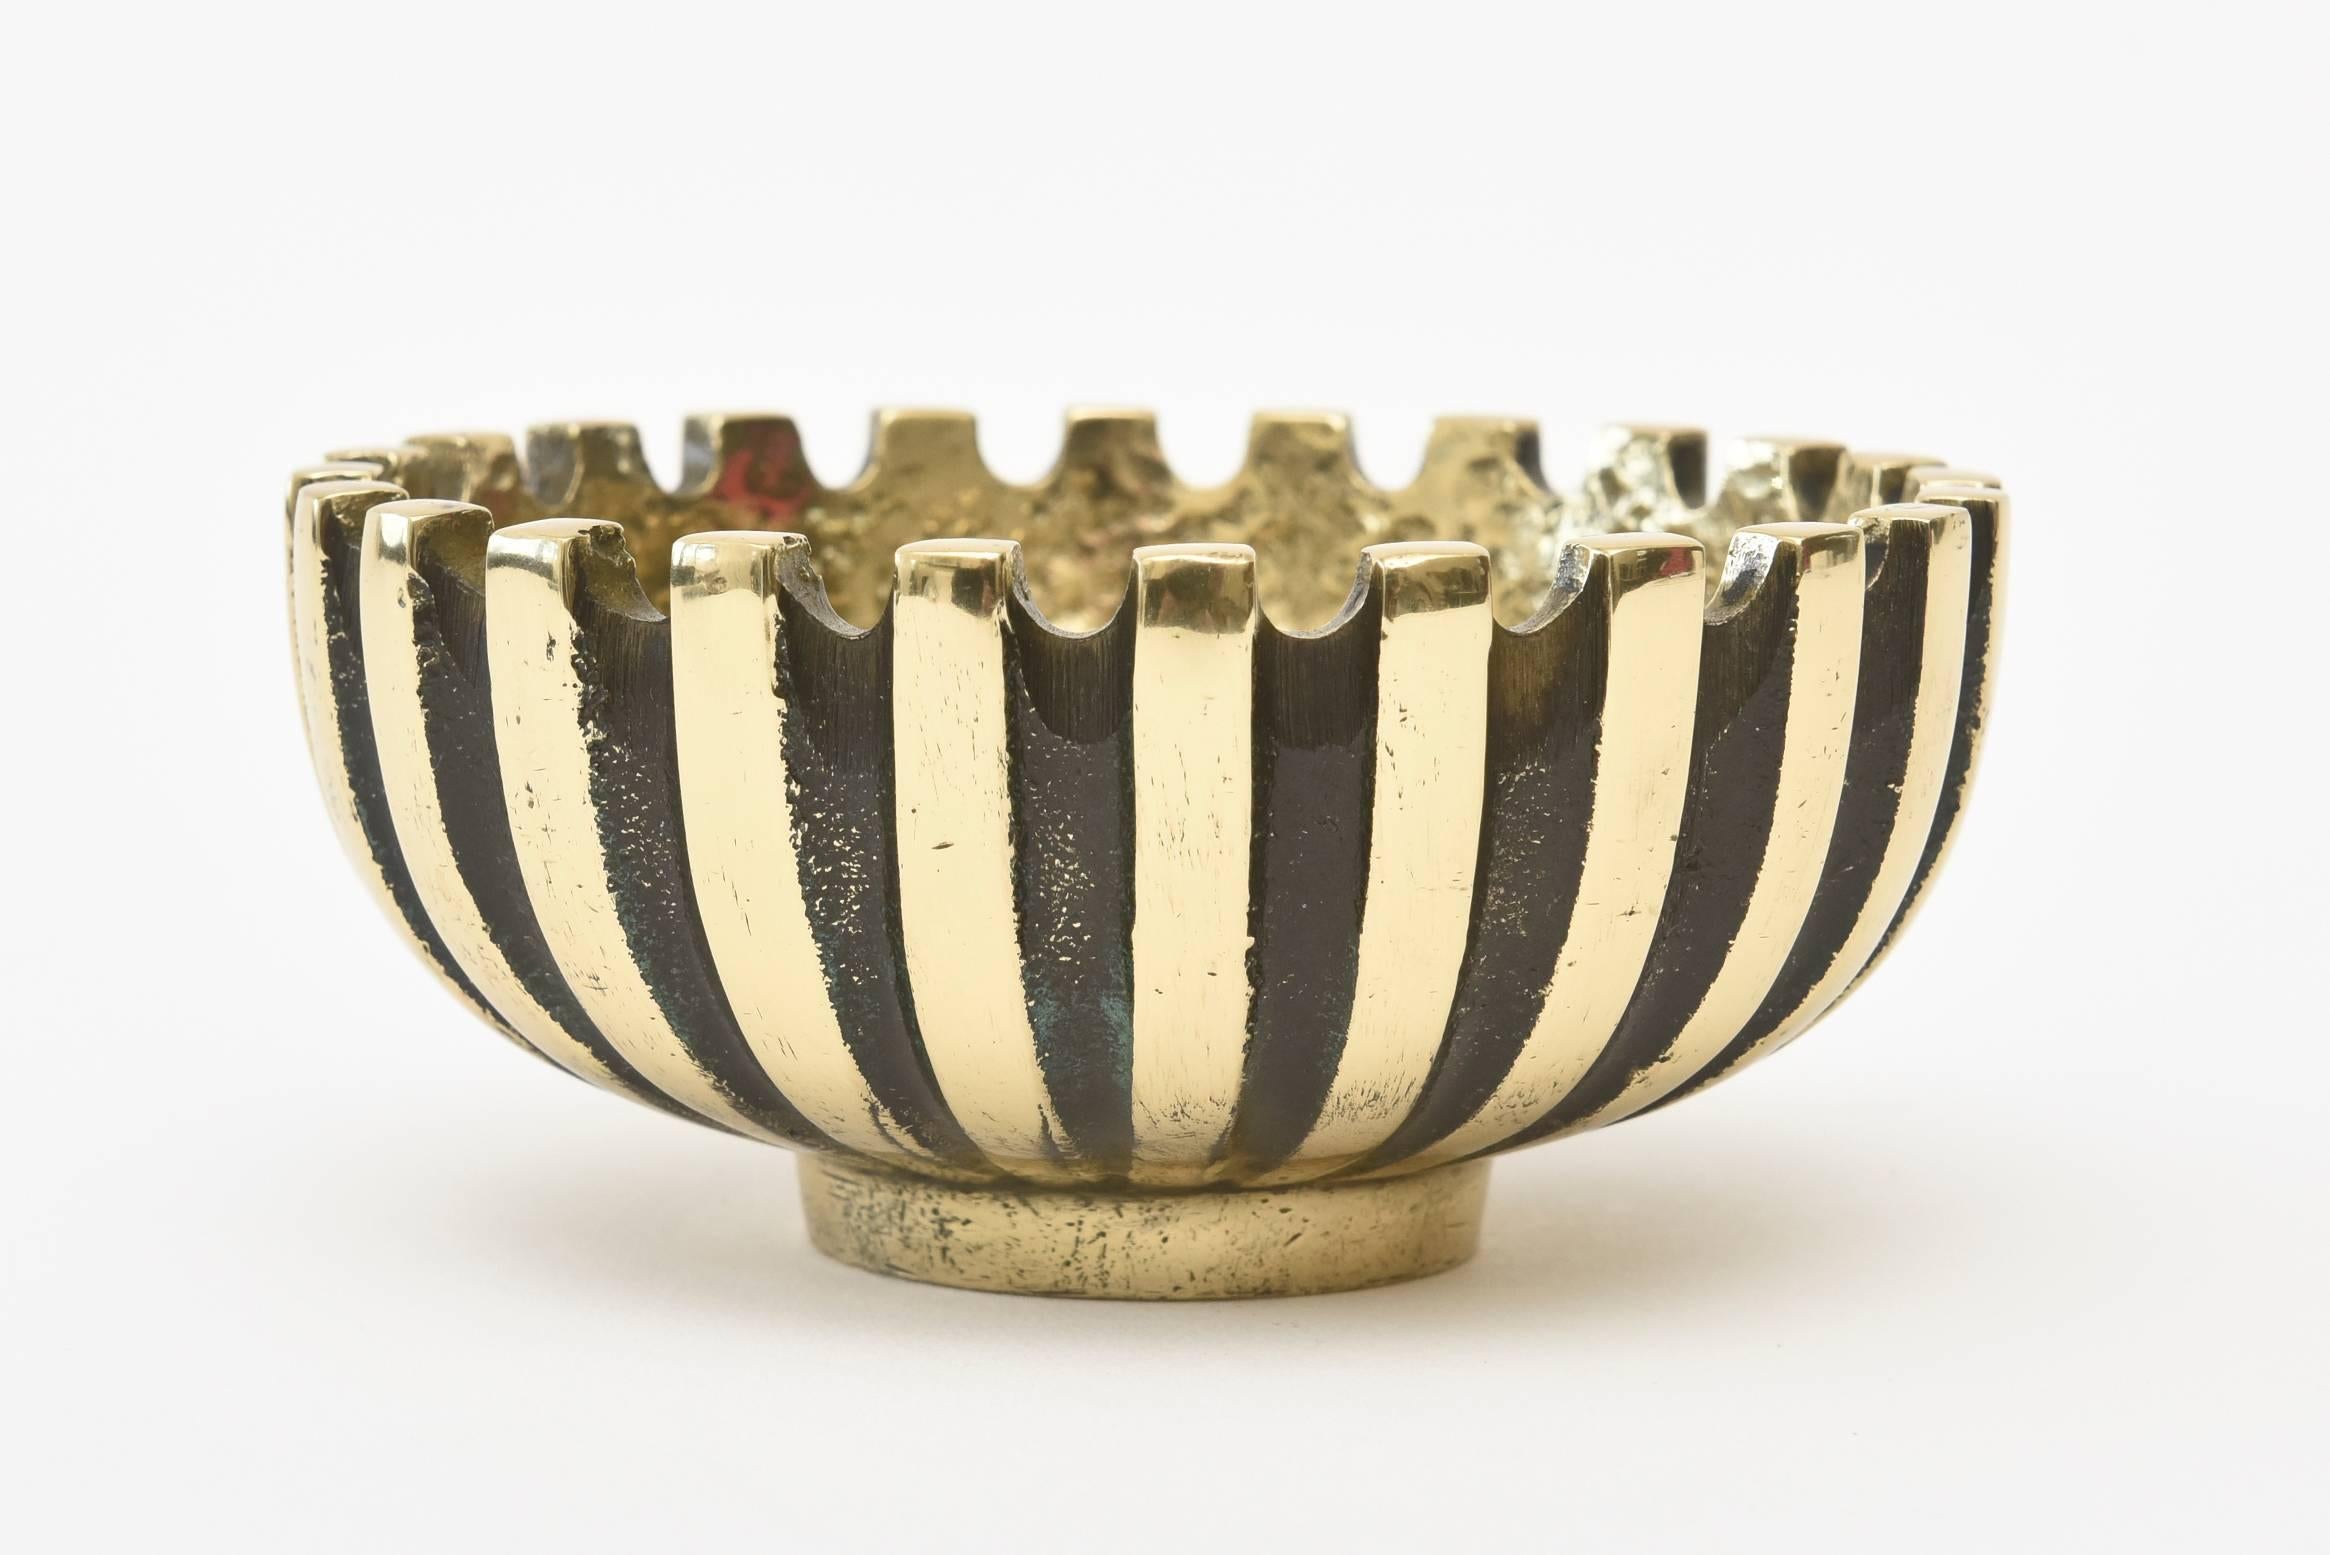 This heavy striking solid brass and blackened midcentury brass bowl has alternating lines of black against gold. This has been attributed to the design of Maurice Ascalon for Pal- Bell Co. It is marked on the bottom Made in Israel. The interior is